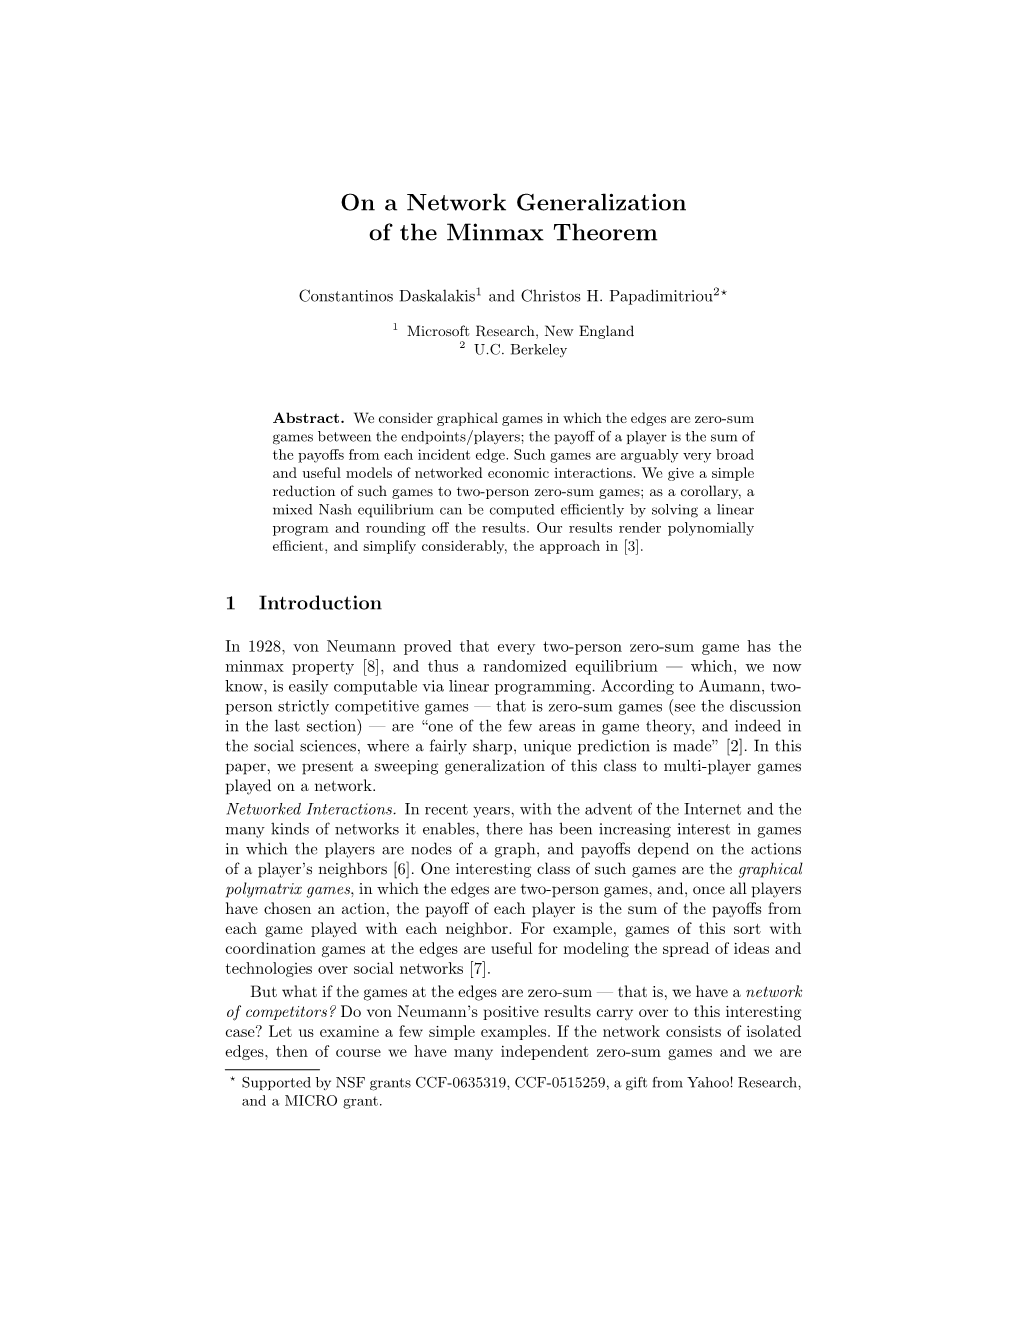 On a Network Generalization of the Minmax Theorem